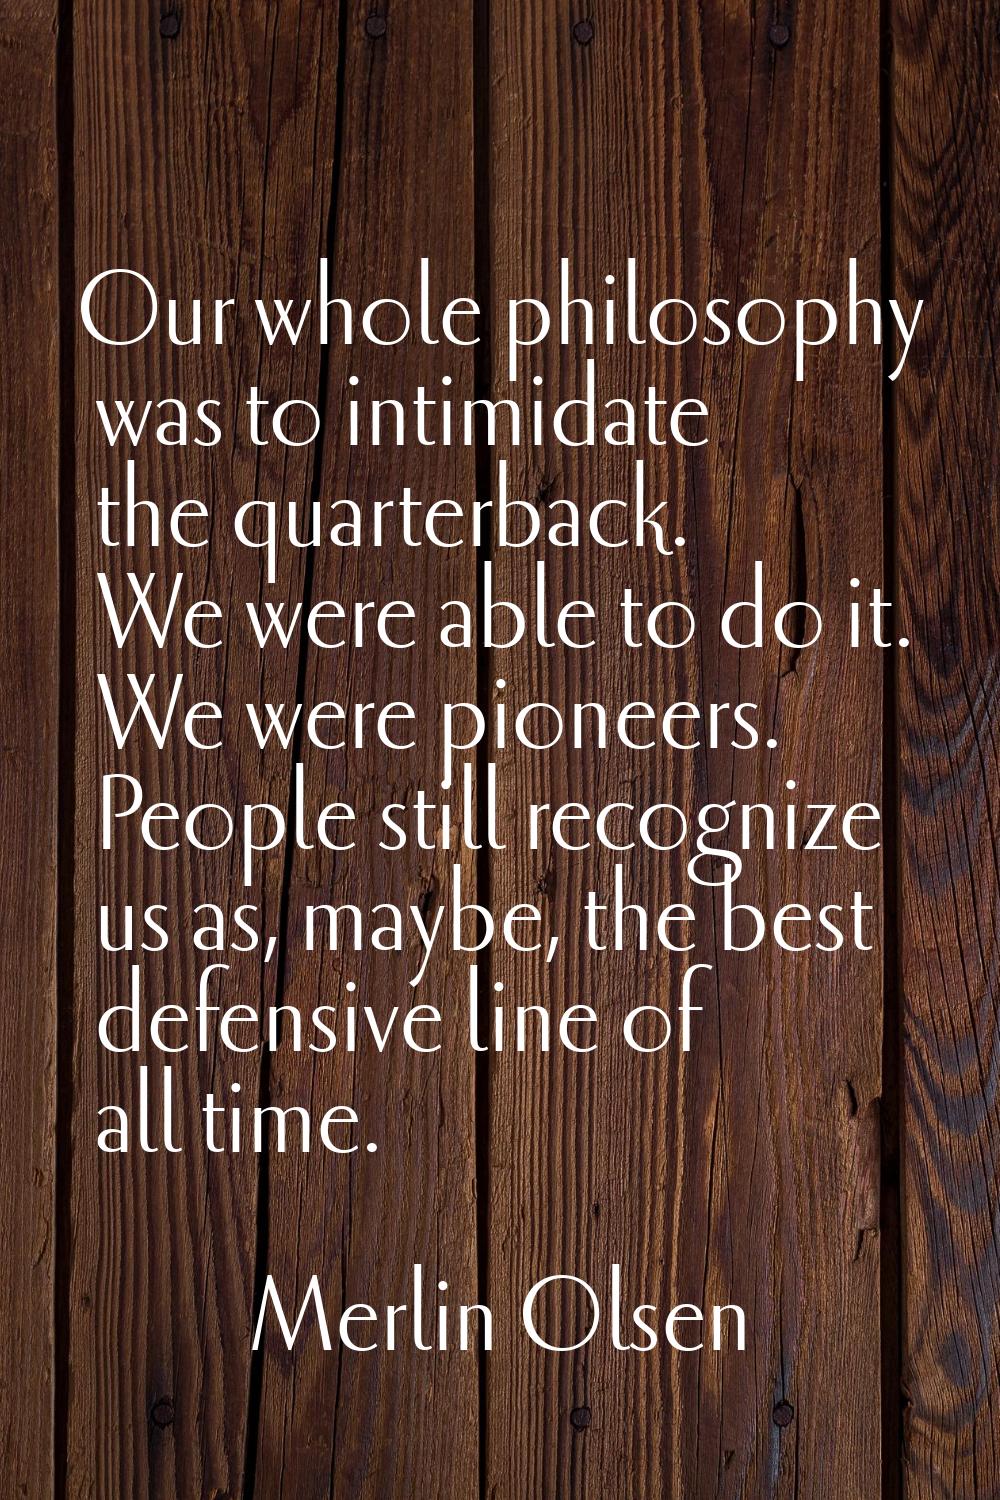 Our whole philosophy was to intimidate the quarterback. We were able to do it. We were pioneers. Pe